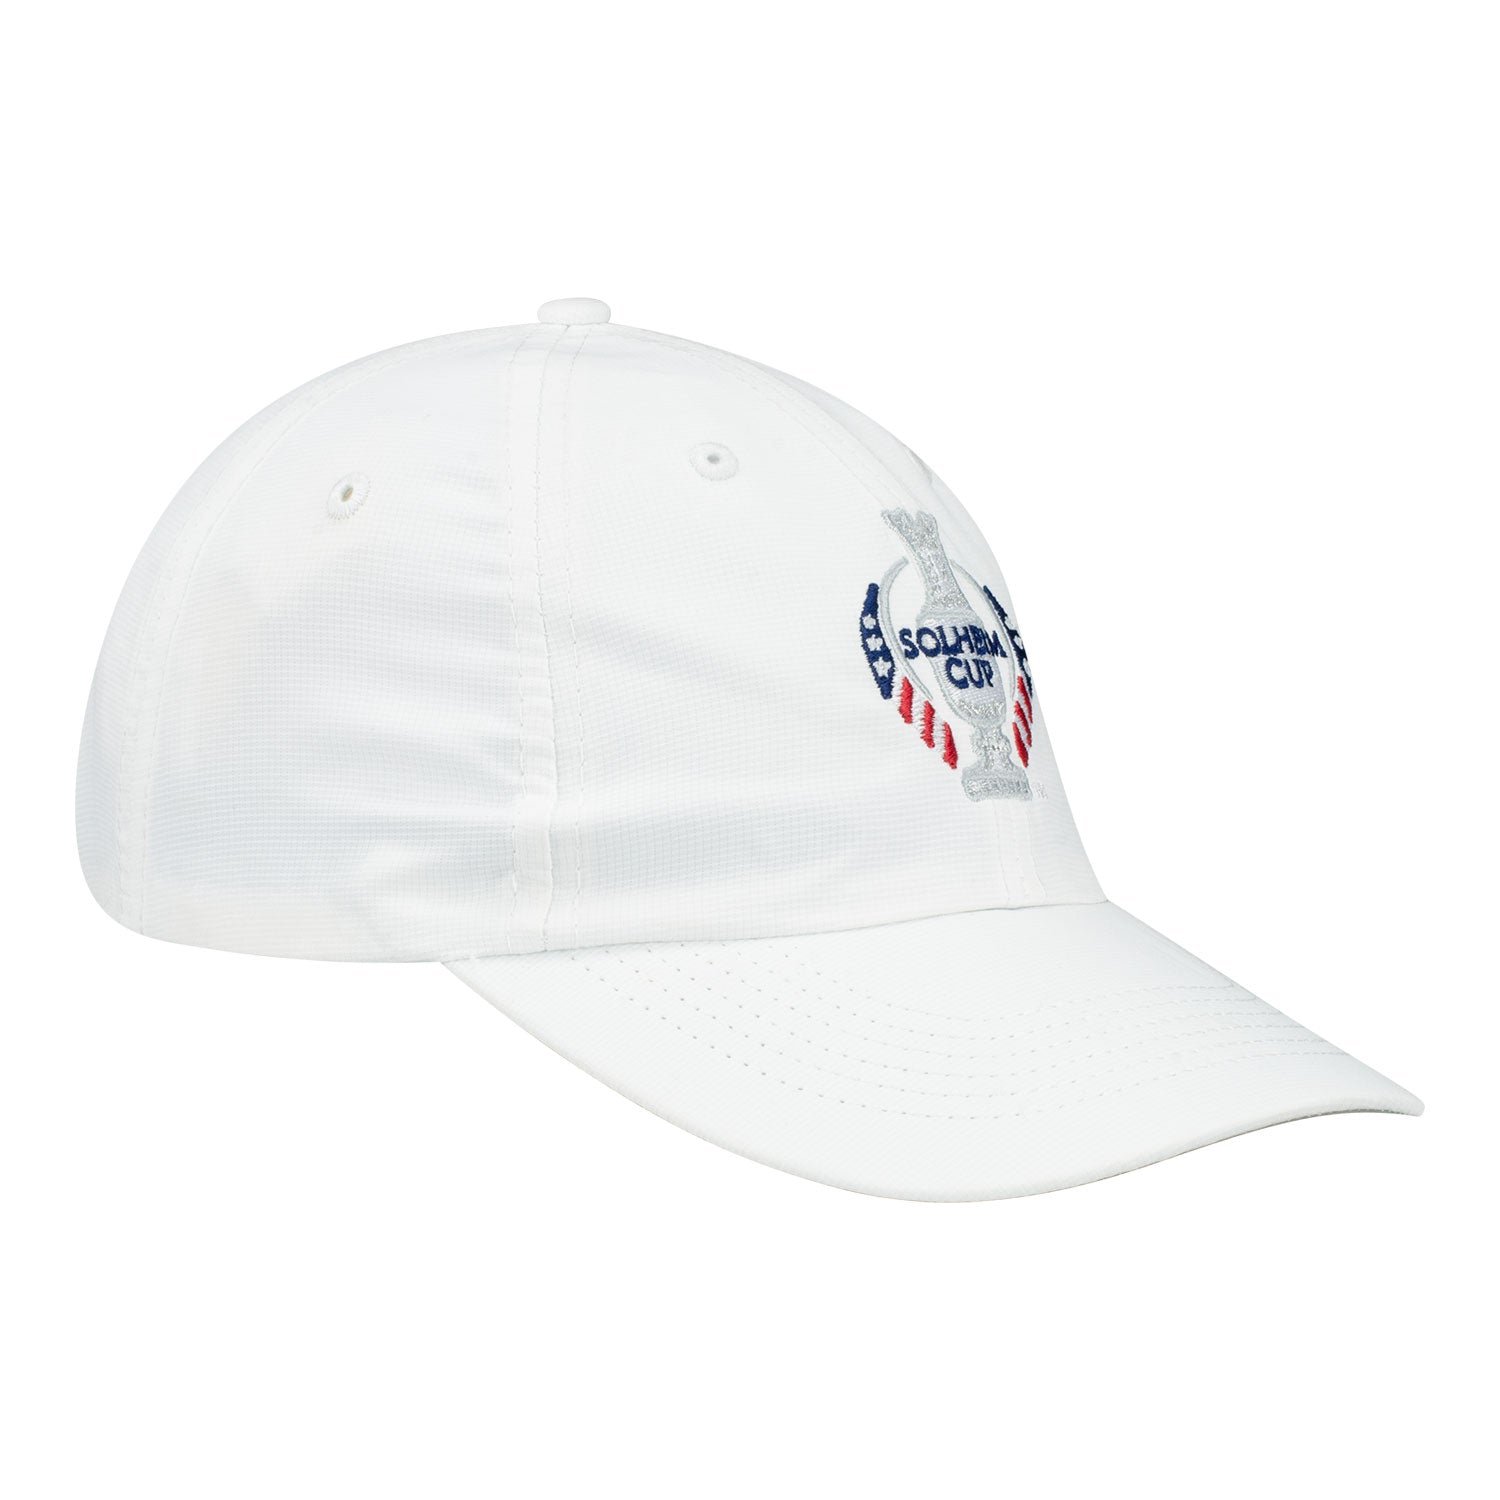 Imperial LPGA Official Solheim Cup Fan Wear in White - Angled Right Side View